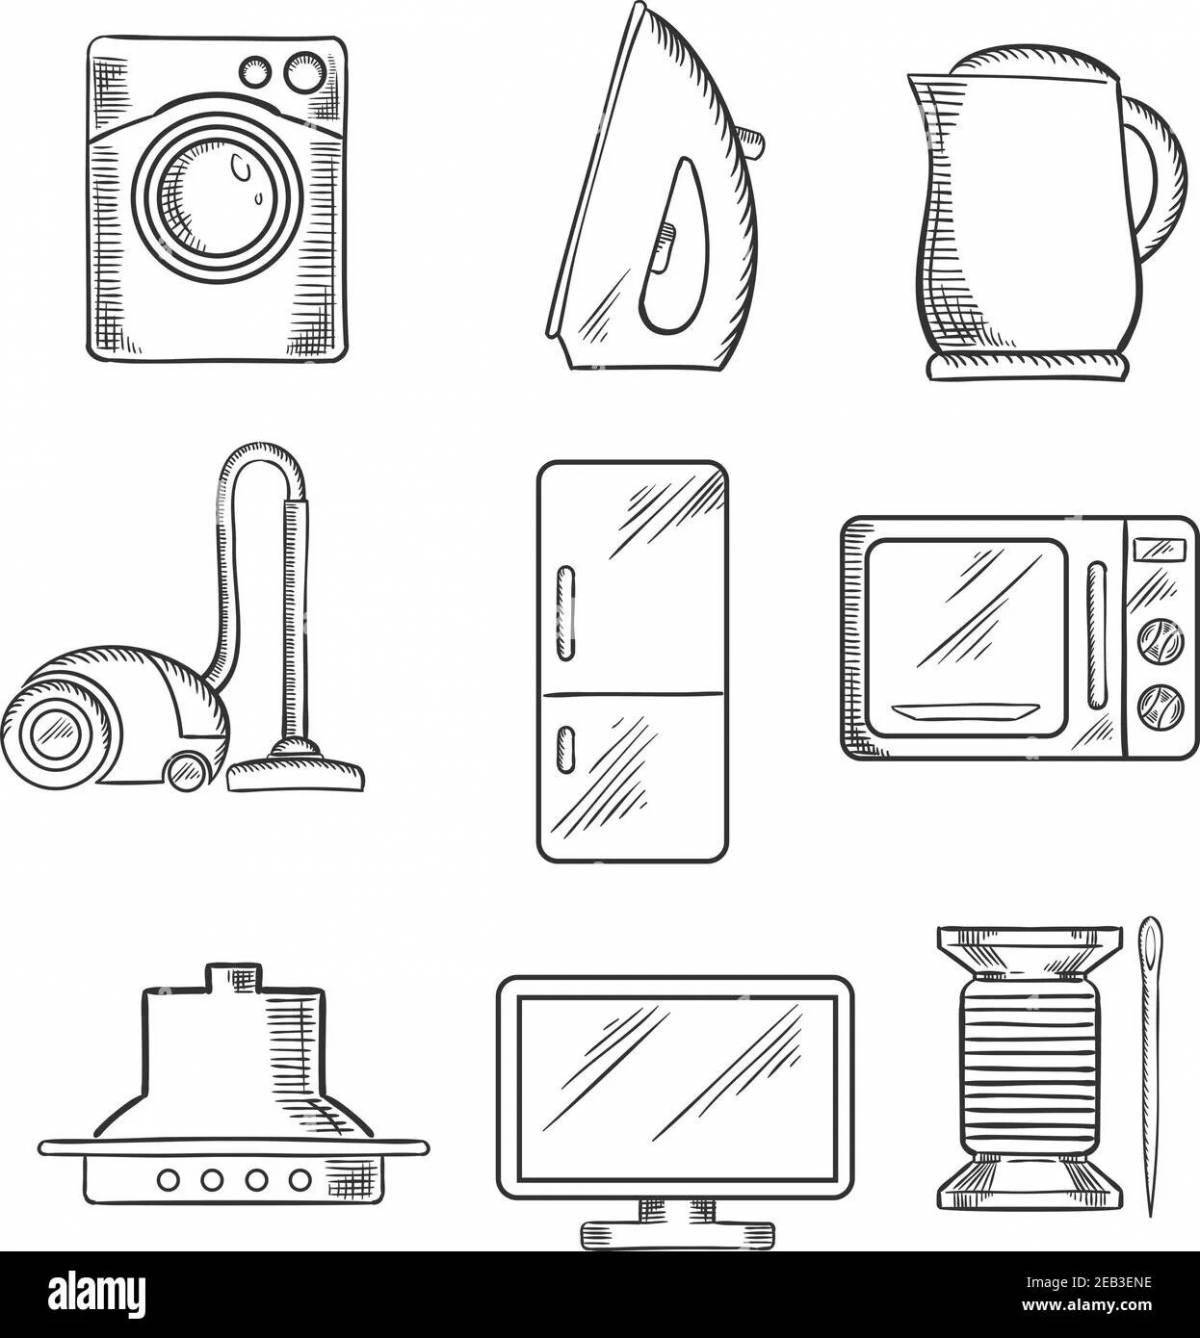 Charming home appliances coloring